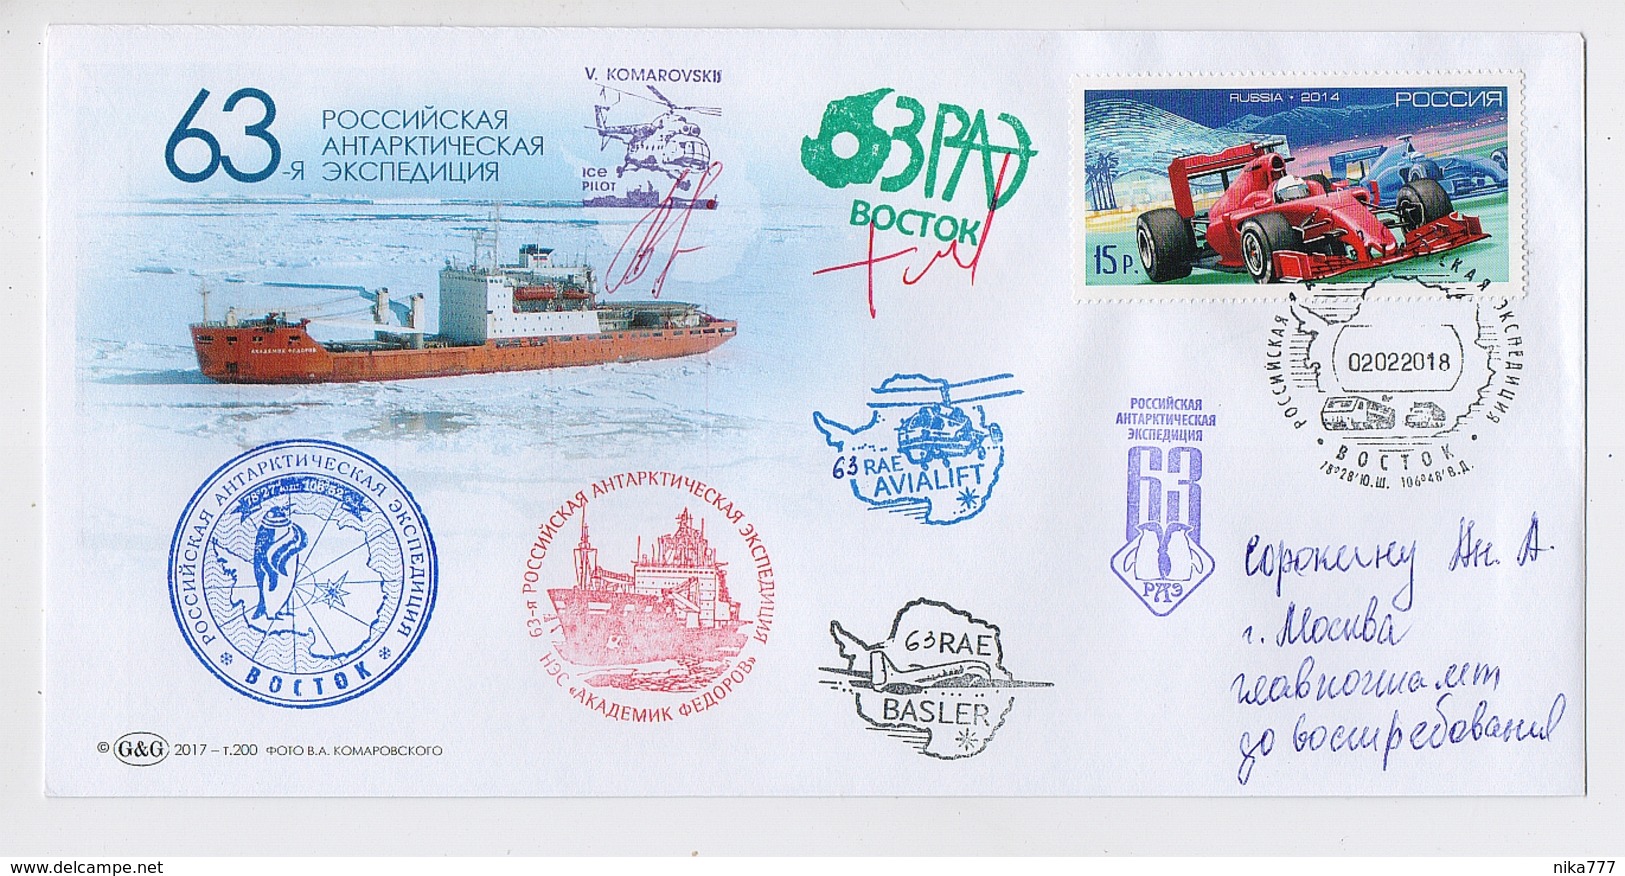 ANTARCTIC Vostok Station 63 RAE Base Pole Mail Cover USSR RUSSIA Signature Helicopter Ship - Bases Antarctiques